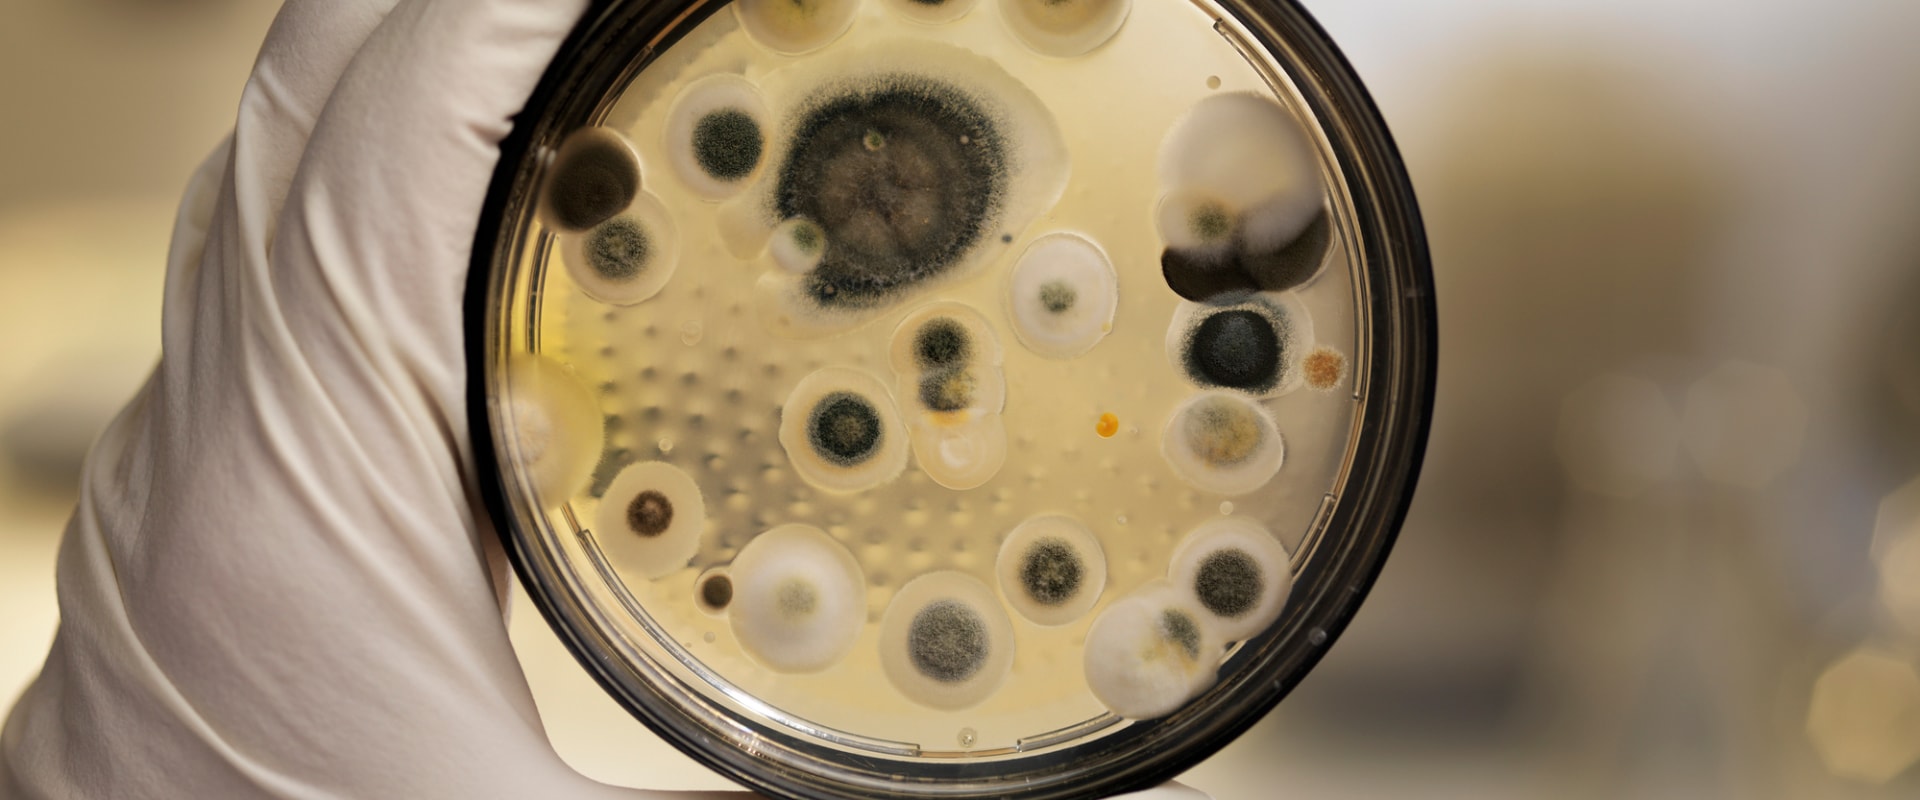 What Does a Mold Test Involve?